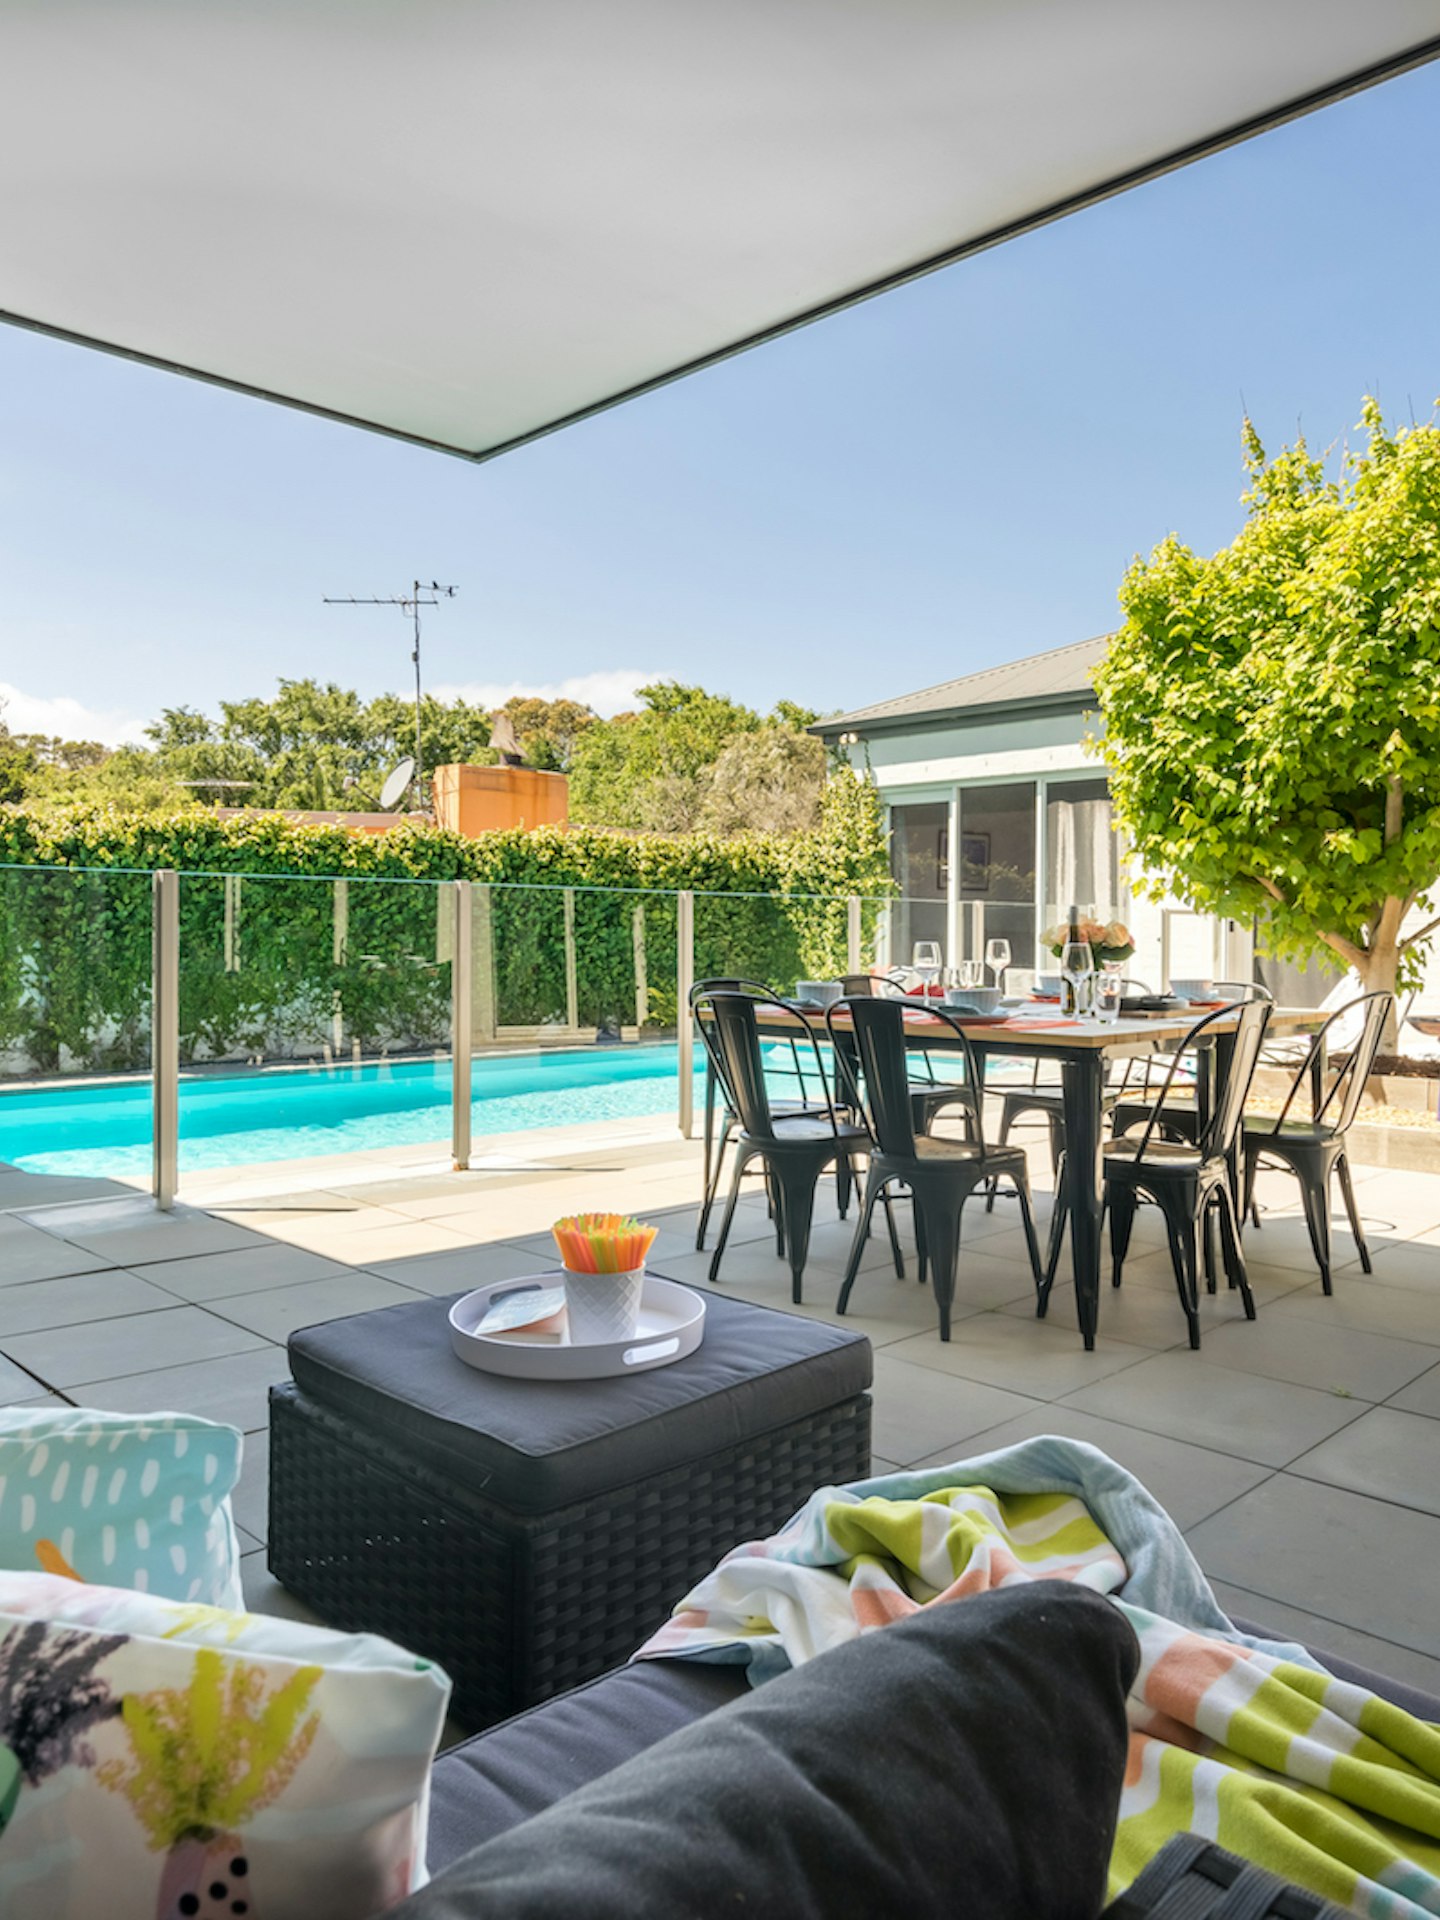 view of inground pool, outdoor dining and barbeque from outdoor sofa